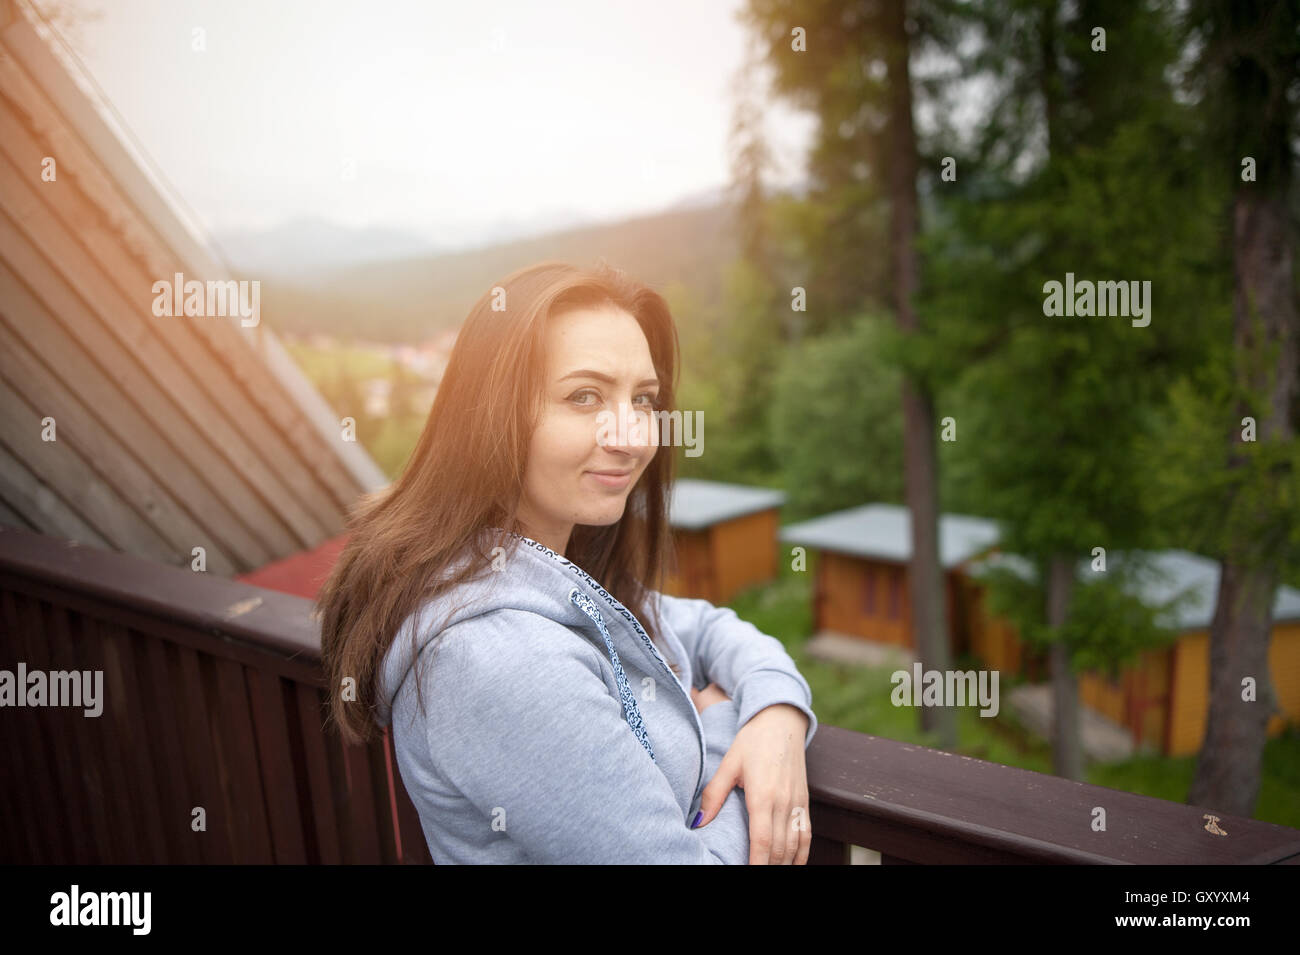 Belle brune teen girl with long hair leaning on railing. Banque D'Images